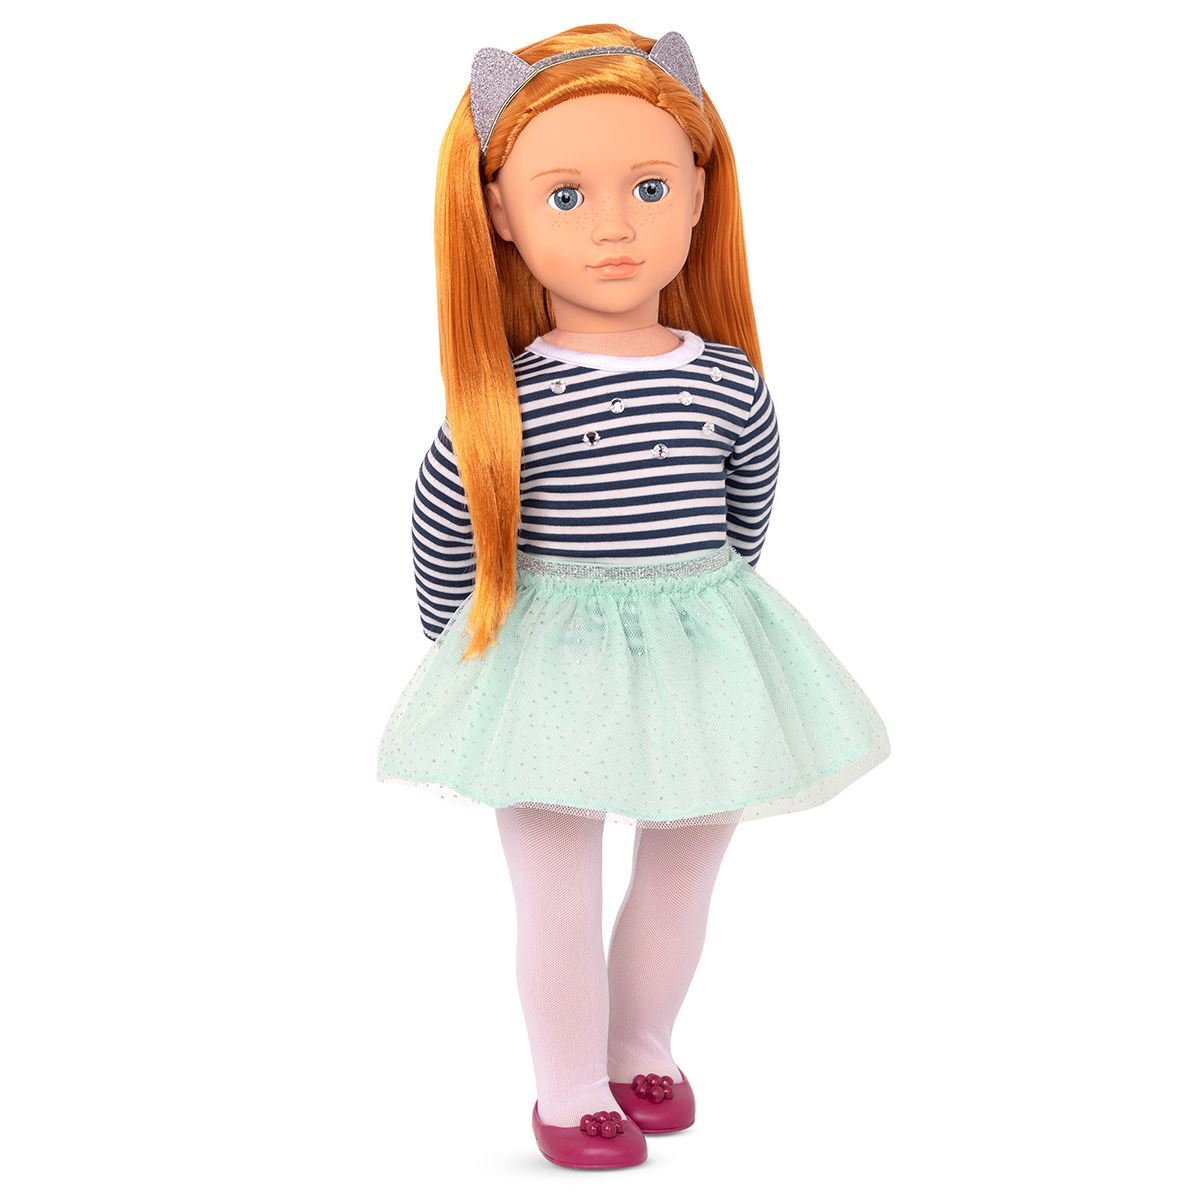 Our Generation 18 Hair Play Doll with Extendable Braids - Hayley NEW | eBay